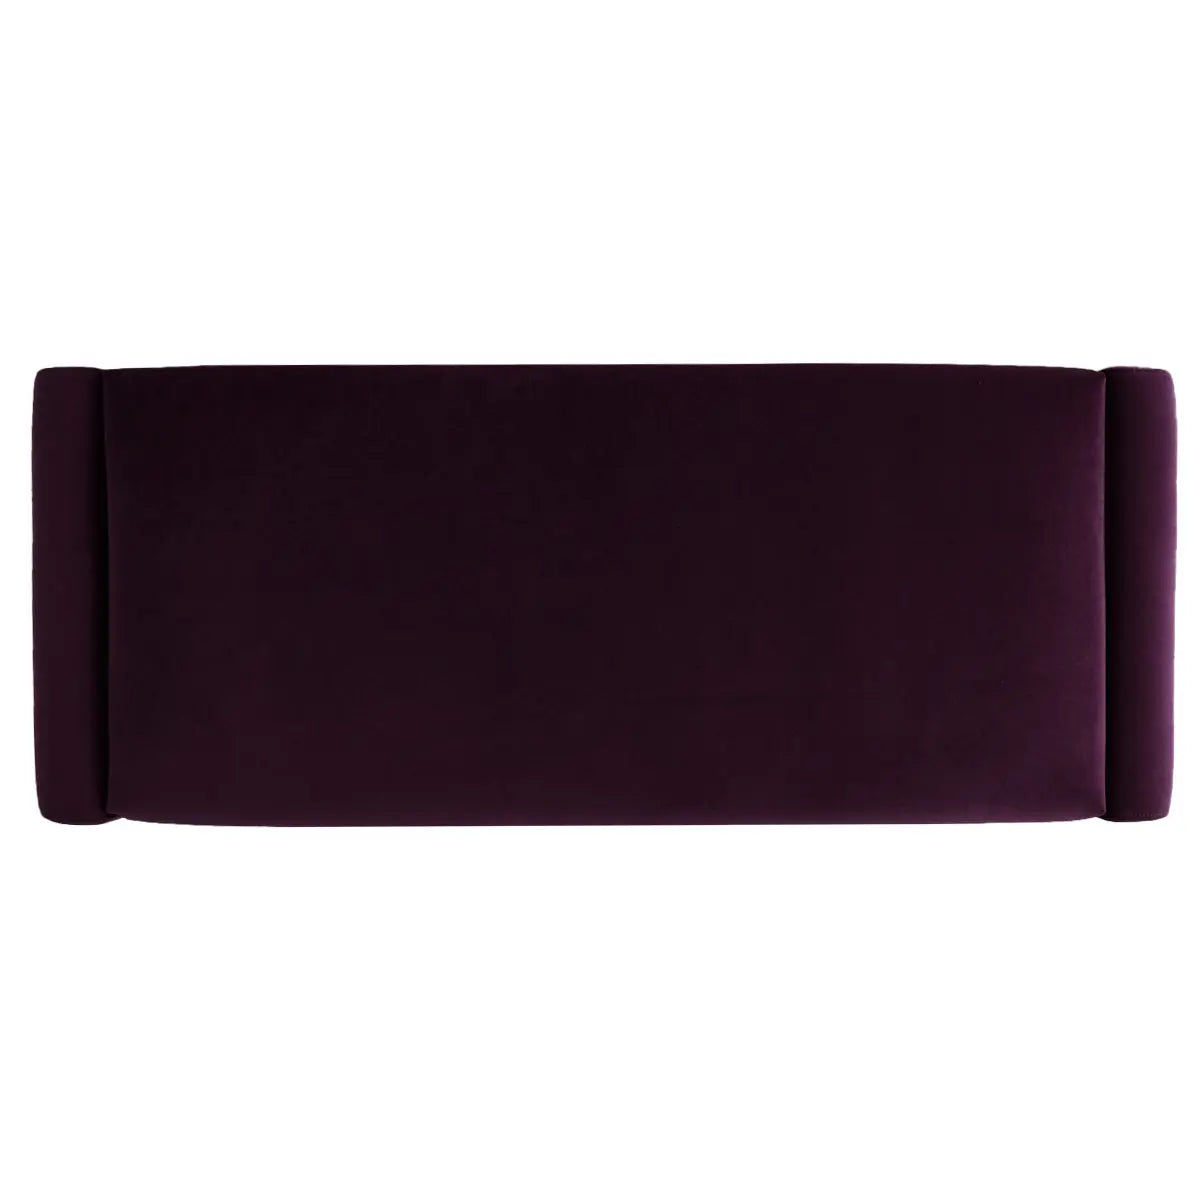 Kaia 47" Velvet and Faux Leather Bench - Elegant and Versatile Seating - The Pop Maison